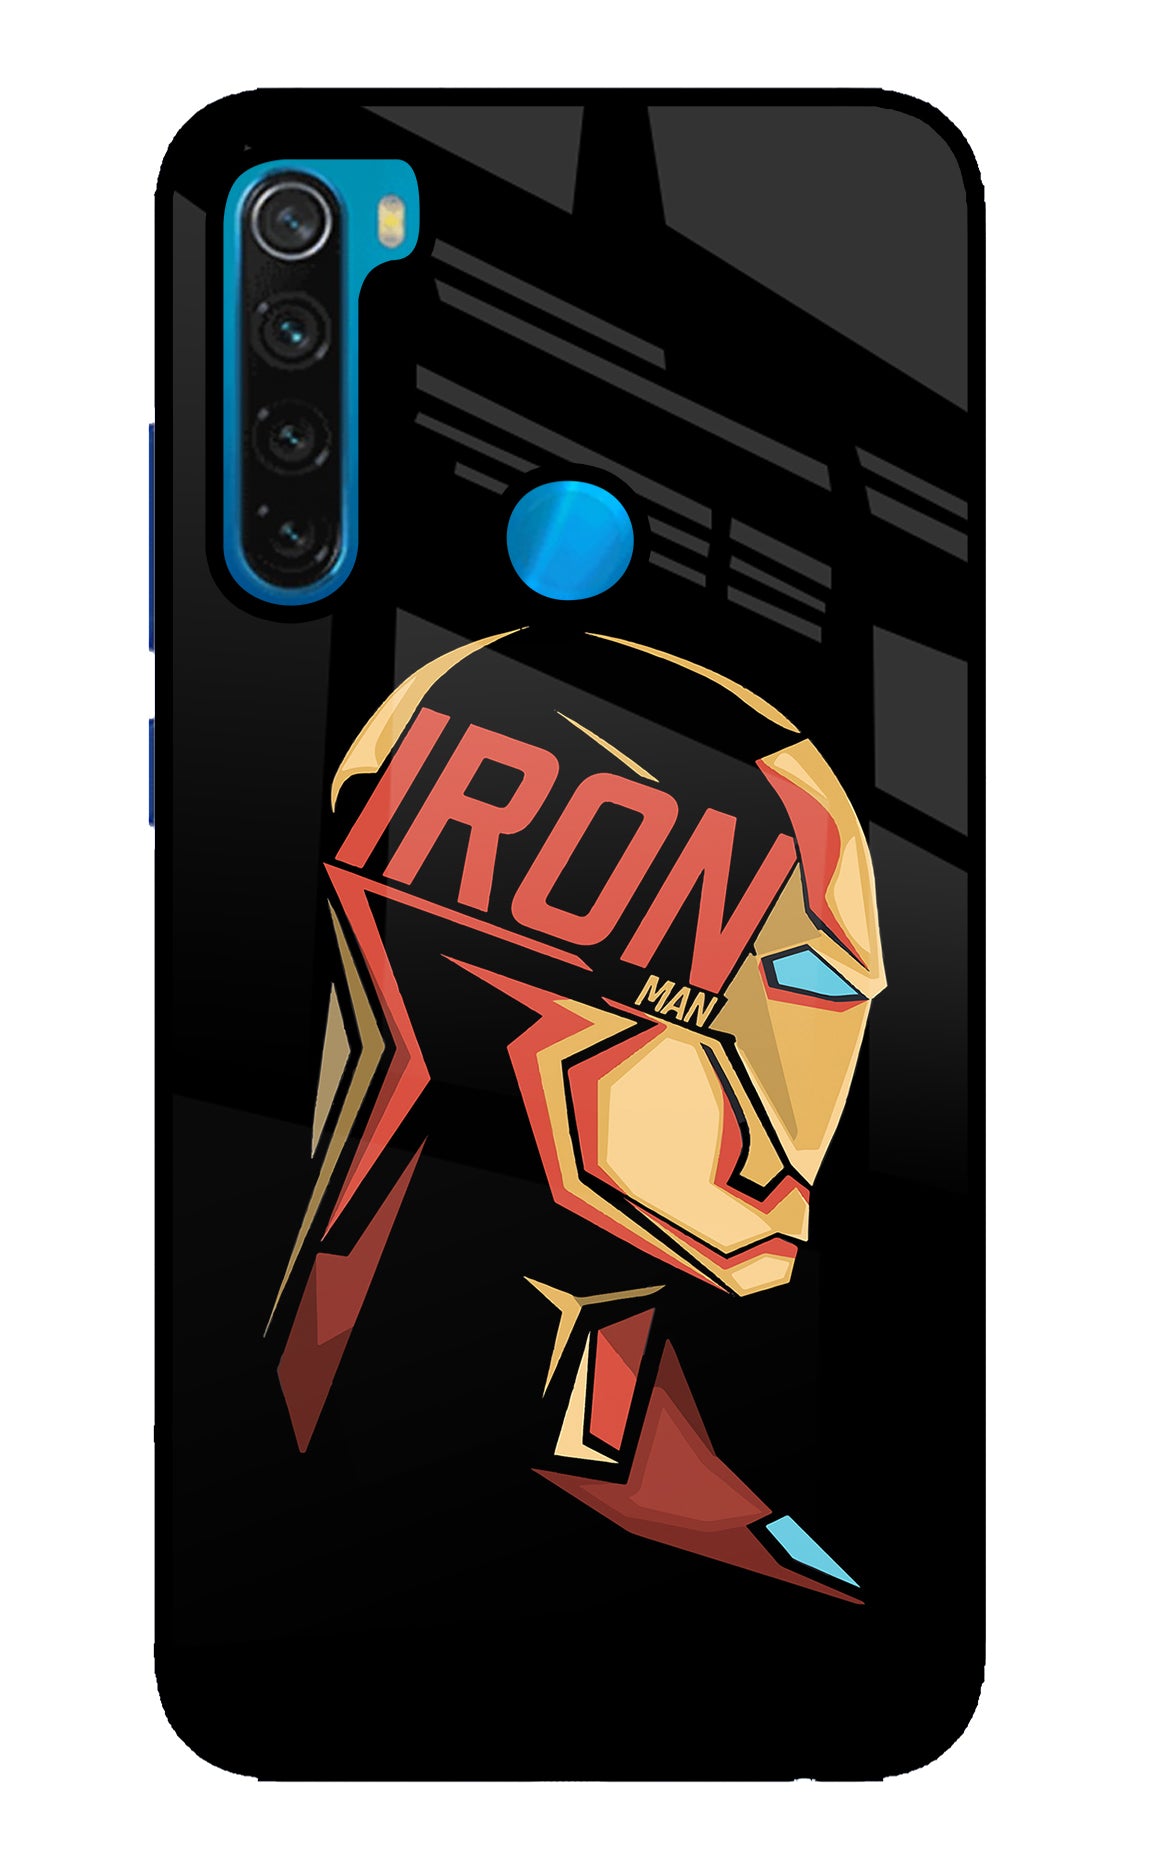 IronMan Redmi Note 8 Back Cover